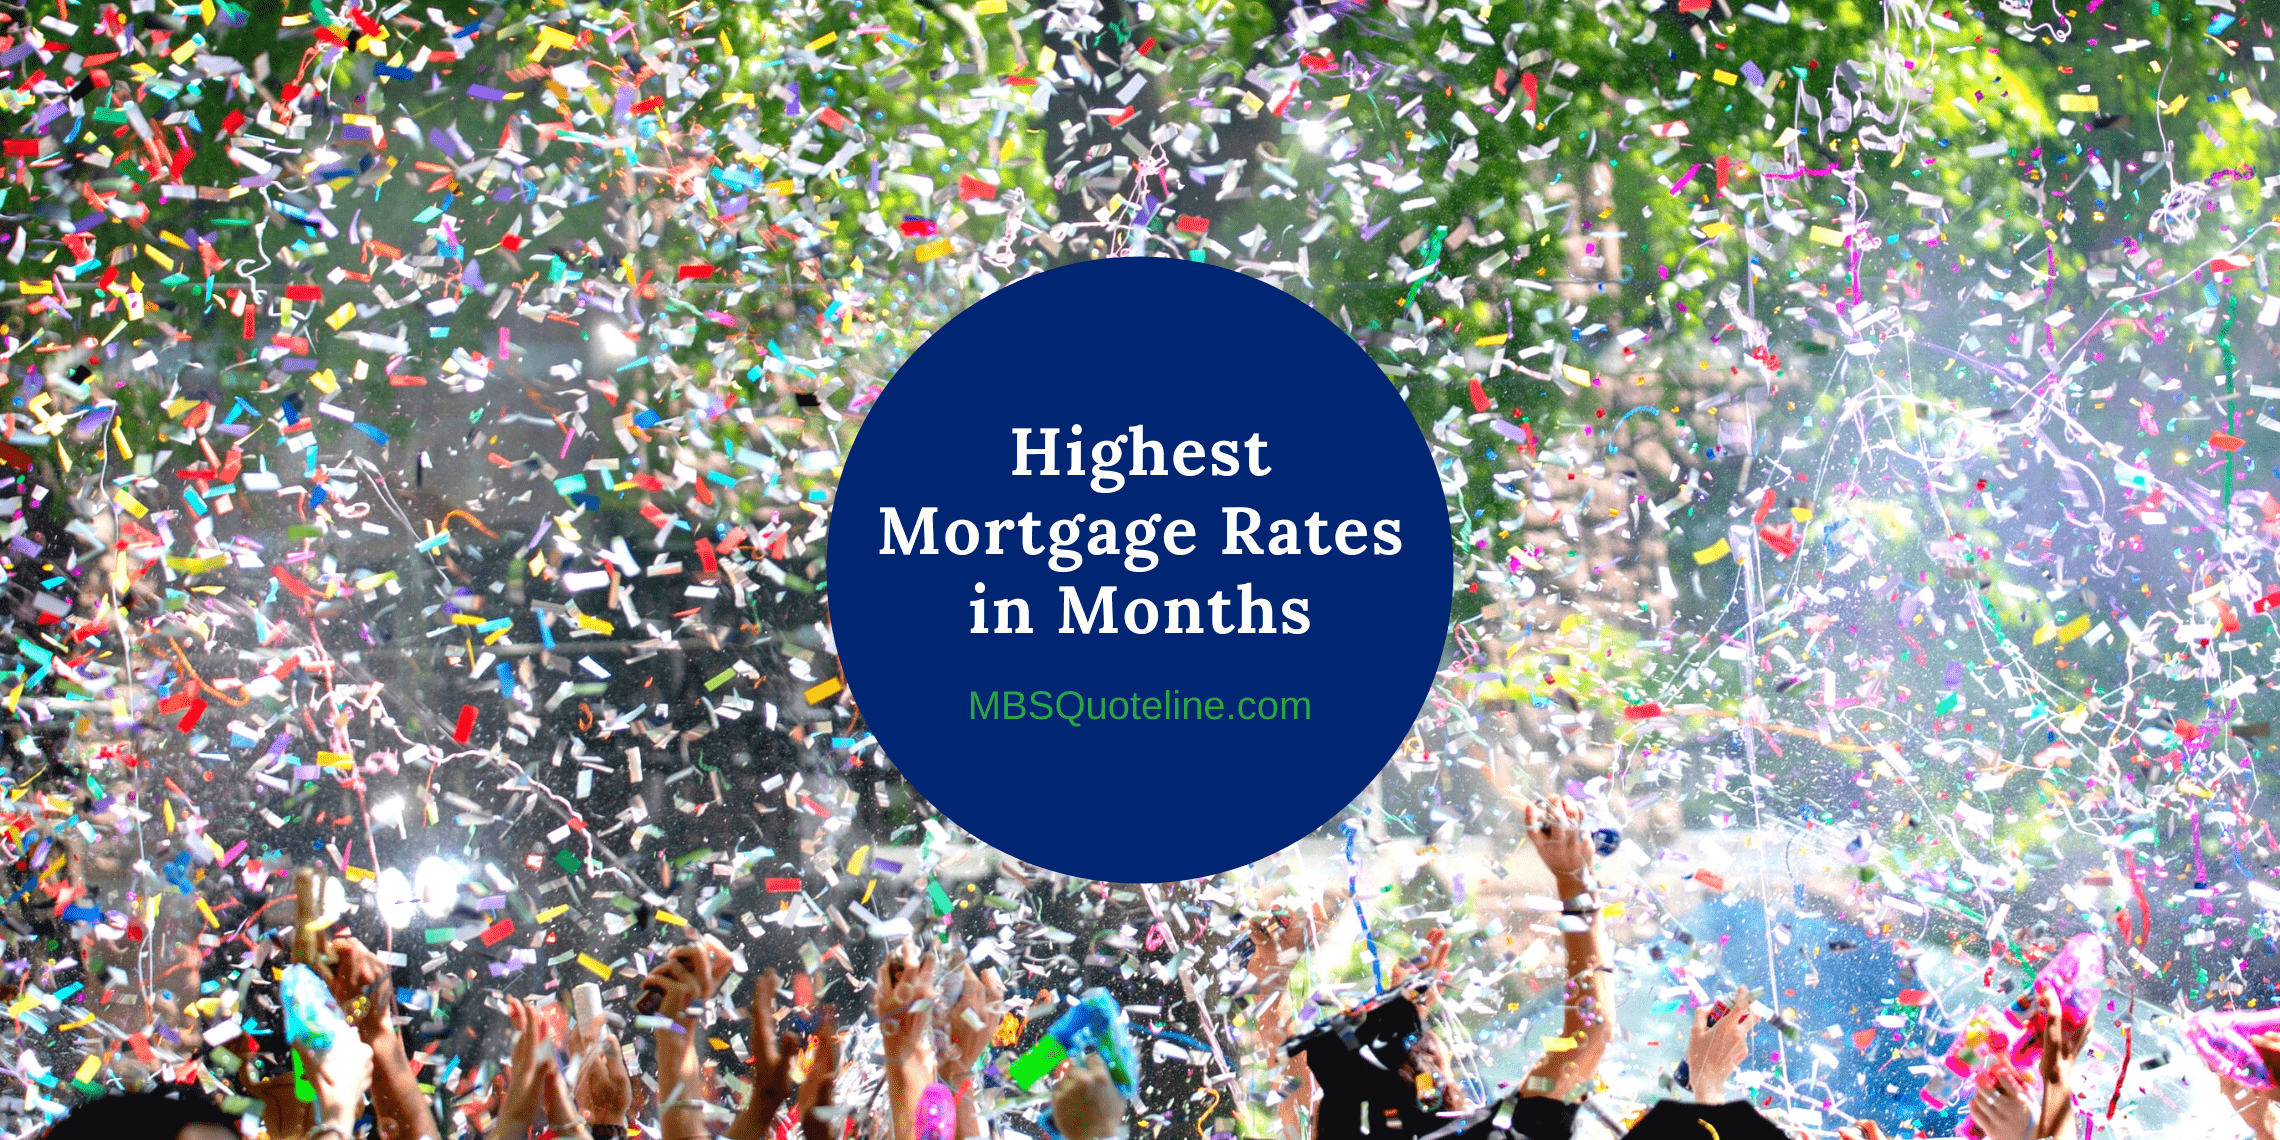 highest mortgage rates in months mbsquoteline mortgagetime early 2021 retail sales featured